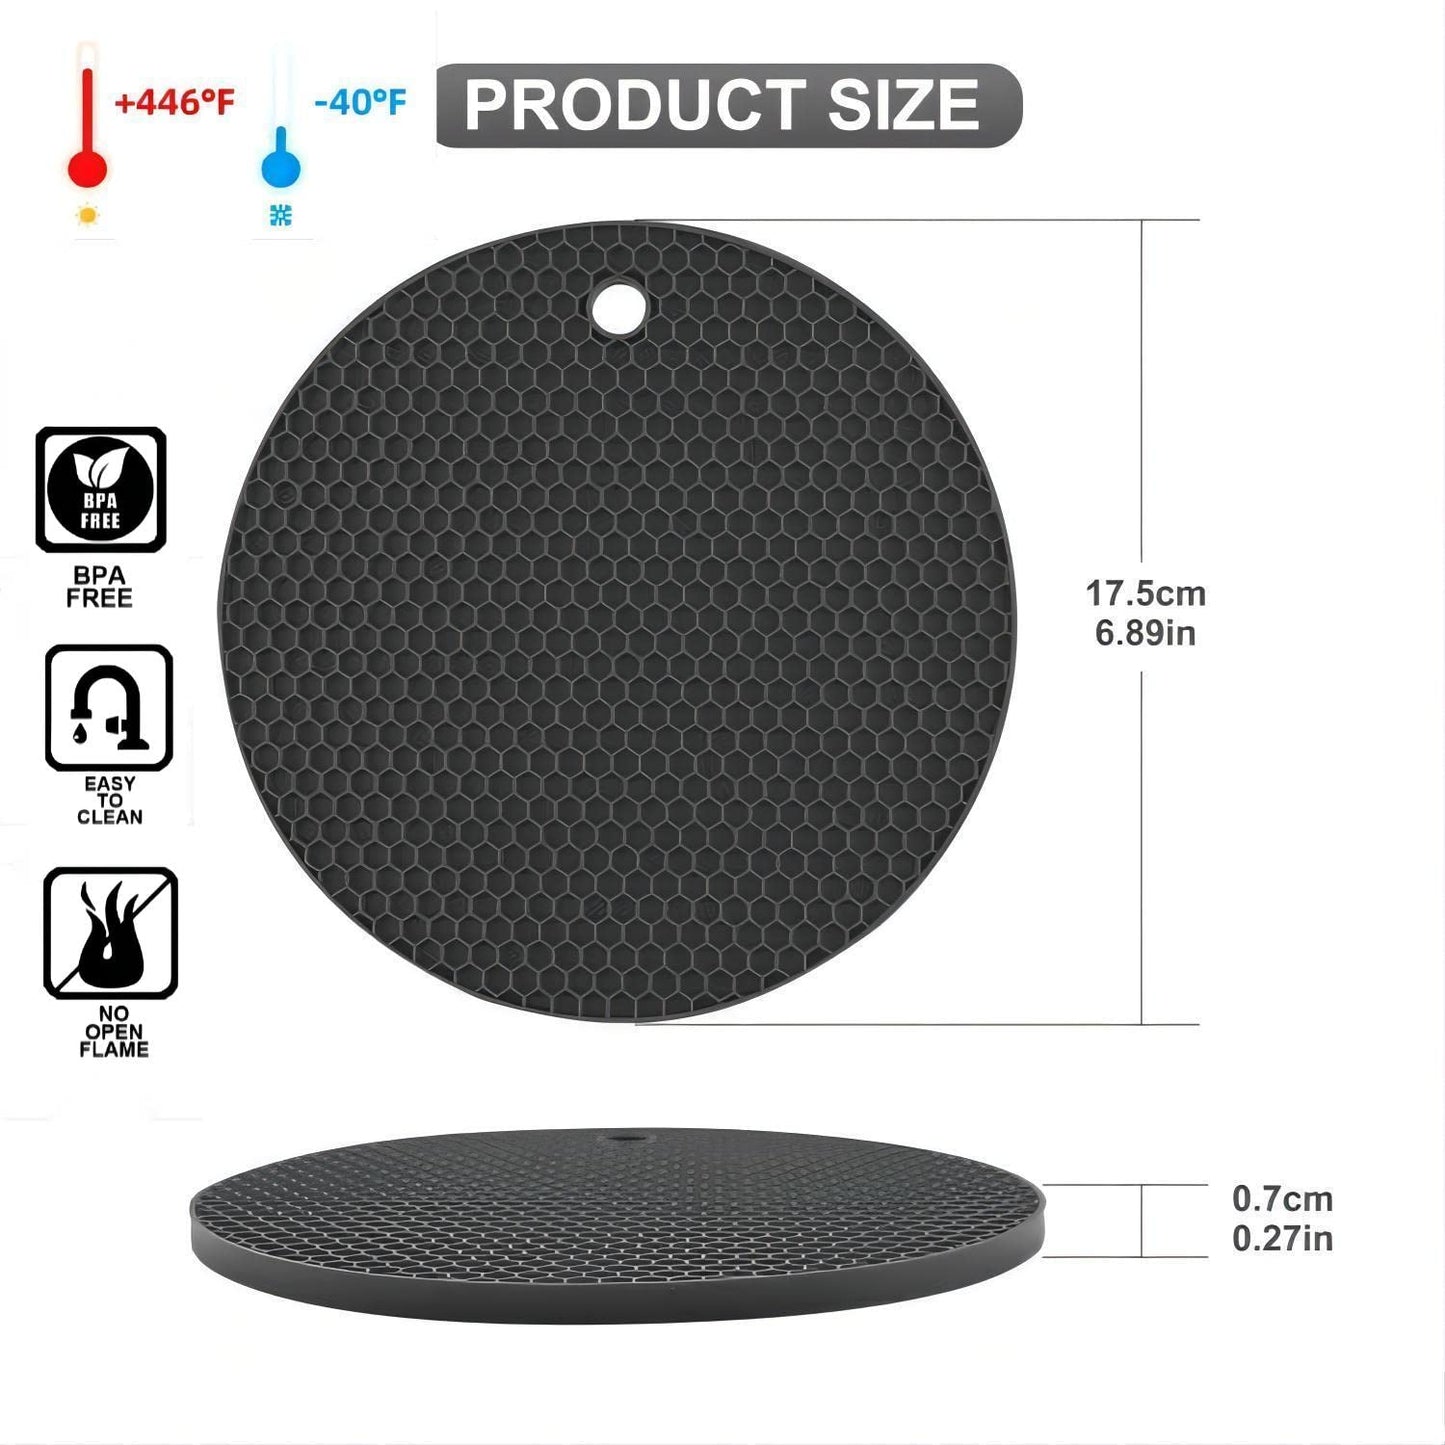 Hotsyang Silicone Trivets,Silicone Trivets for Hot Pots and Pans,Silicone Trivets for Hot Dishes,Trivet Mats for Kitchen, Shape:Round Silicone Mats Set,Silicone Hot Pads for Kitchen Table,Black 4 pcs